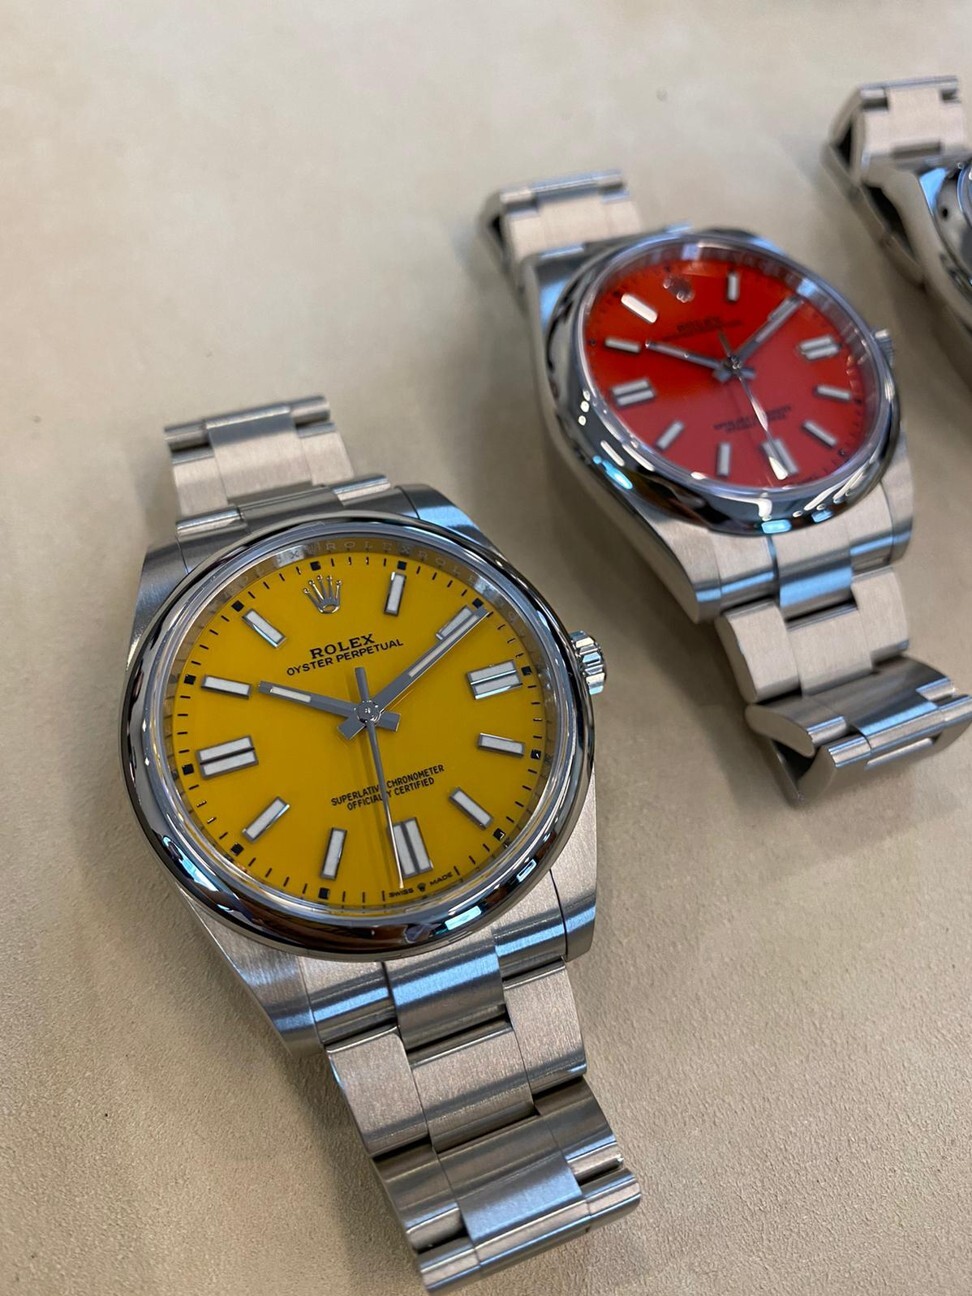 🌀Wrist roll🌀Wednesday featuring the latest 2020 Rolex Submariner